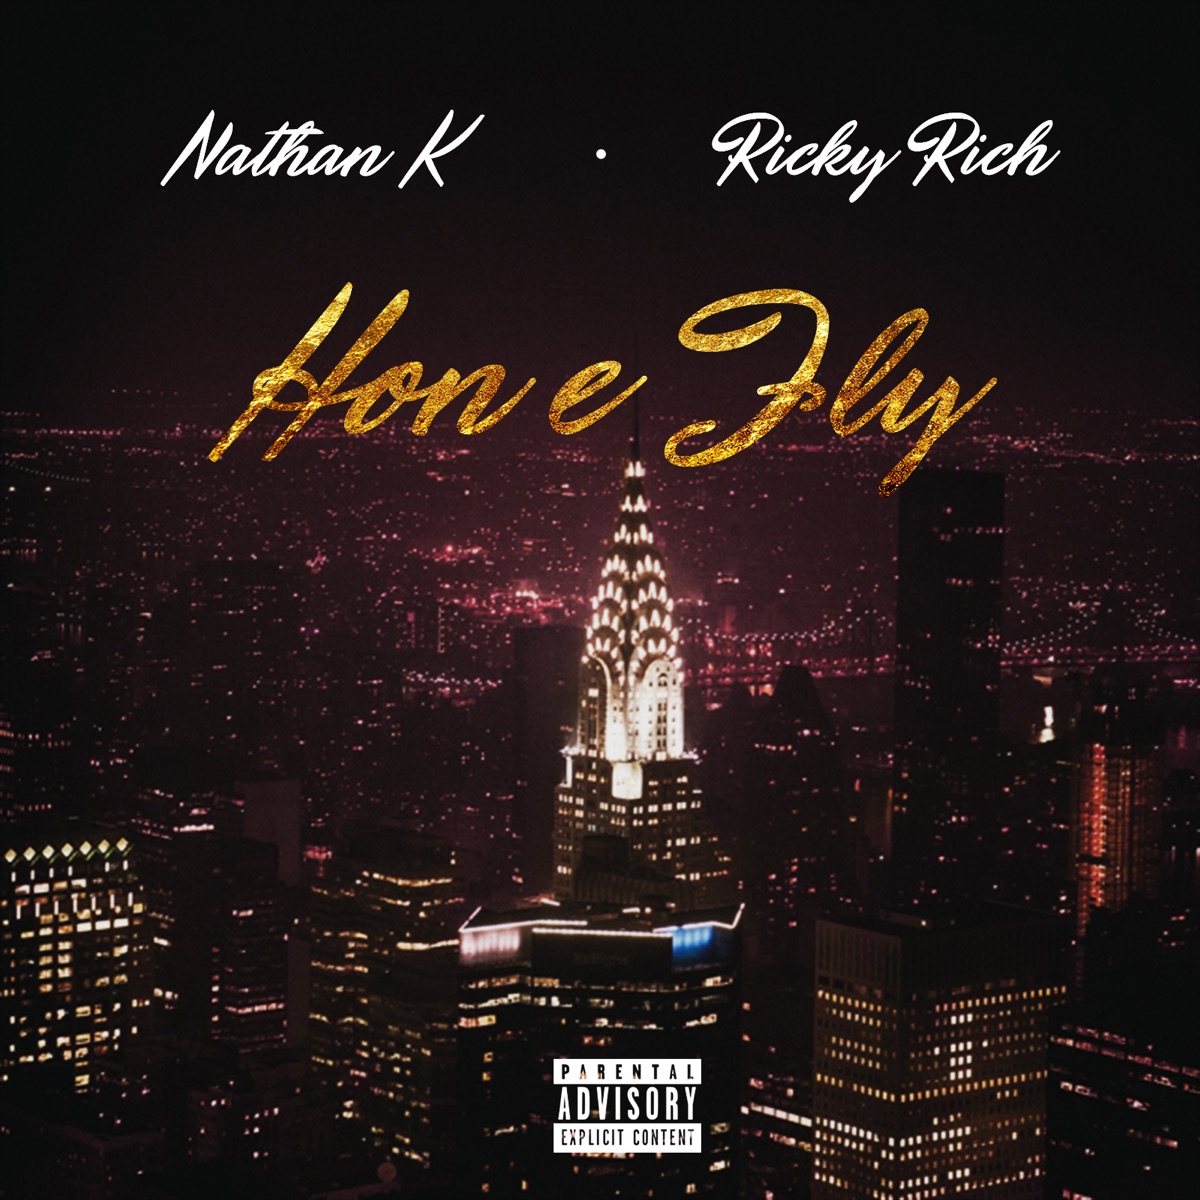 Hon E Fly (feat. Ricky Rich) - Single by Nathan K on Apple Music